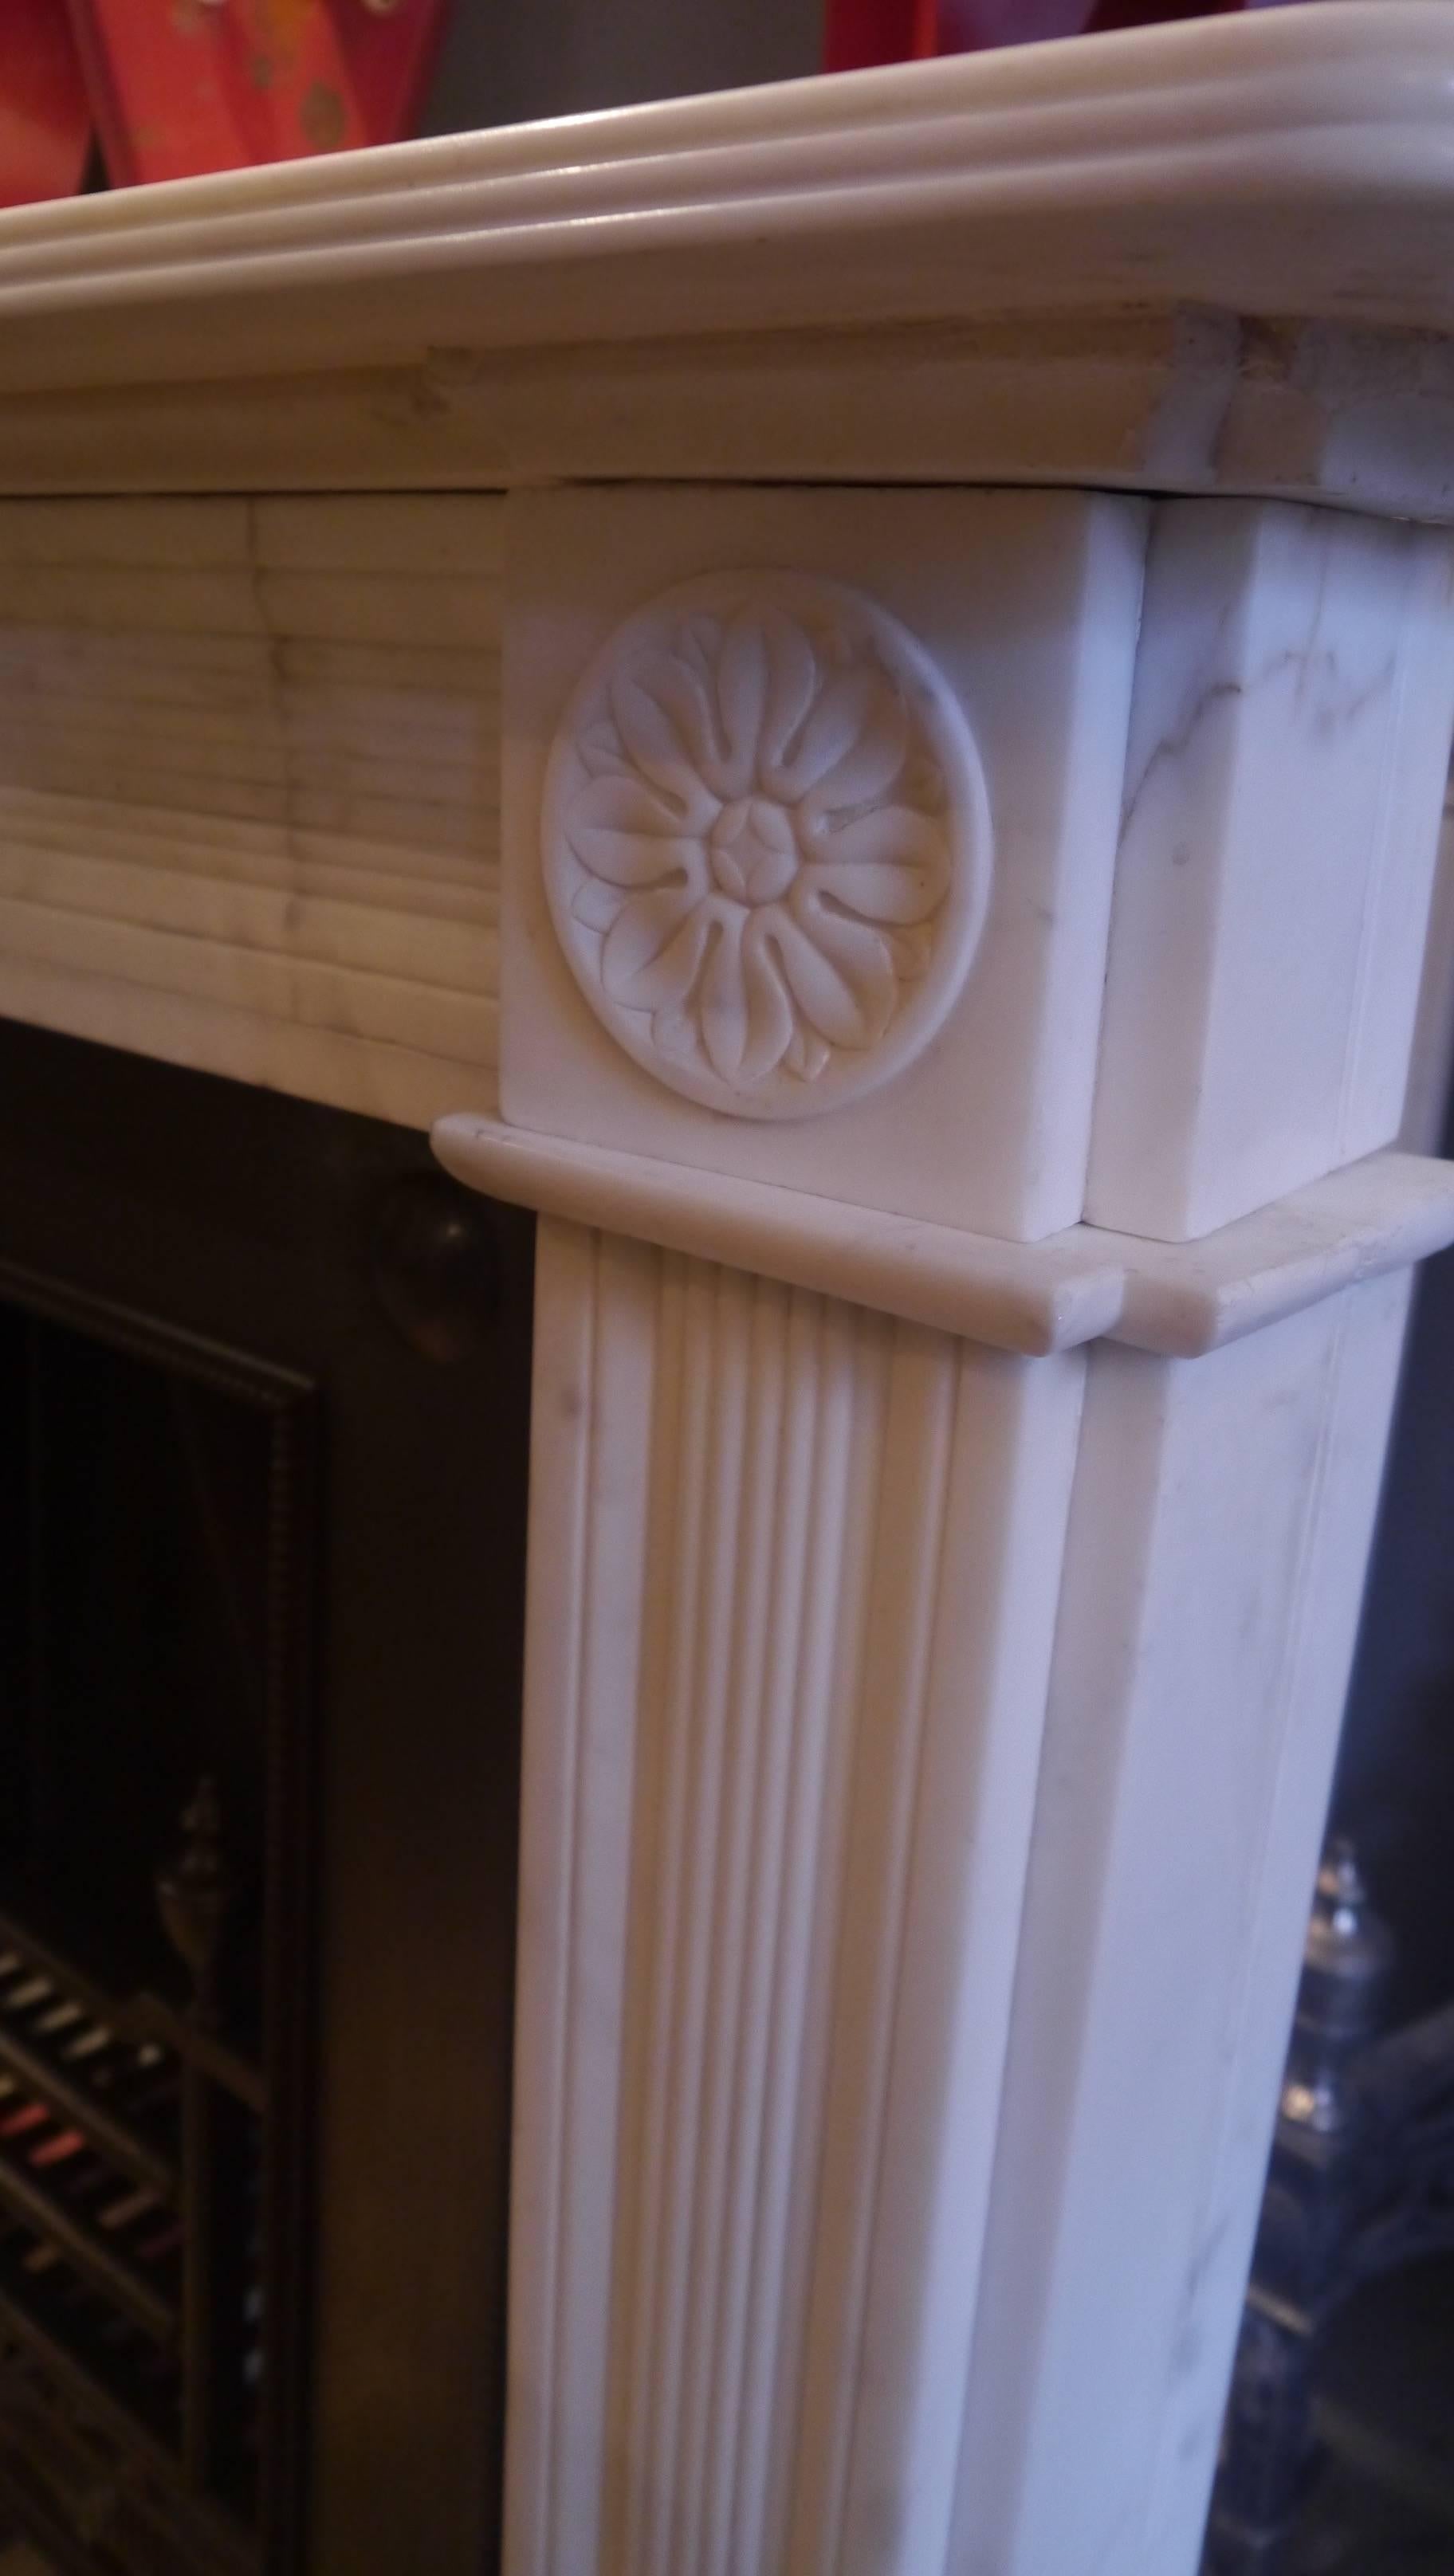 Original statuary white marble surround with floral cornerblocks, a centre plaque of an urn, reeded legs and frieze and with a double birdsbeak shelf, circa 1820. Opening 37.5